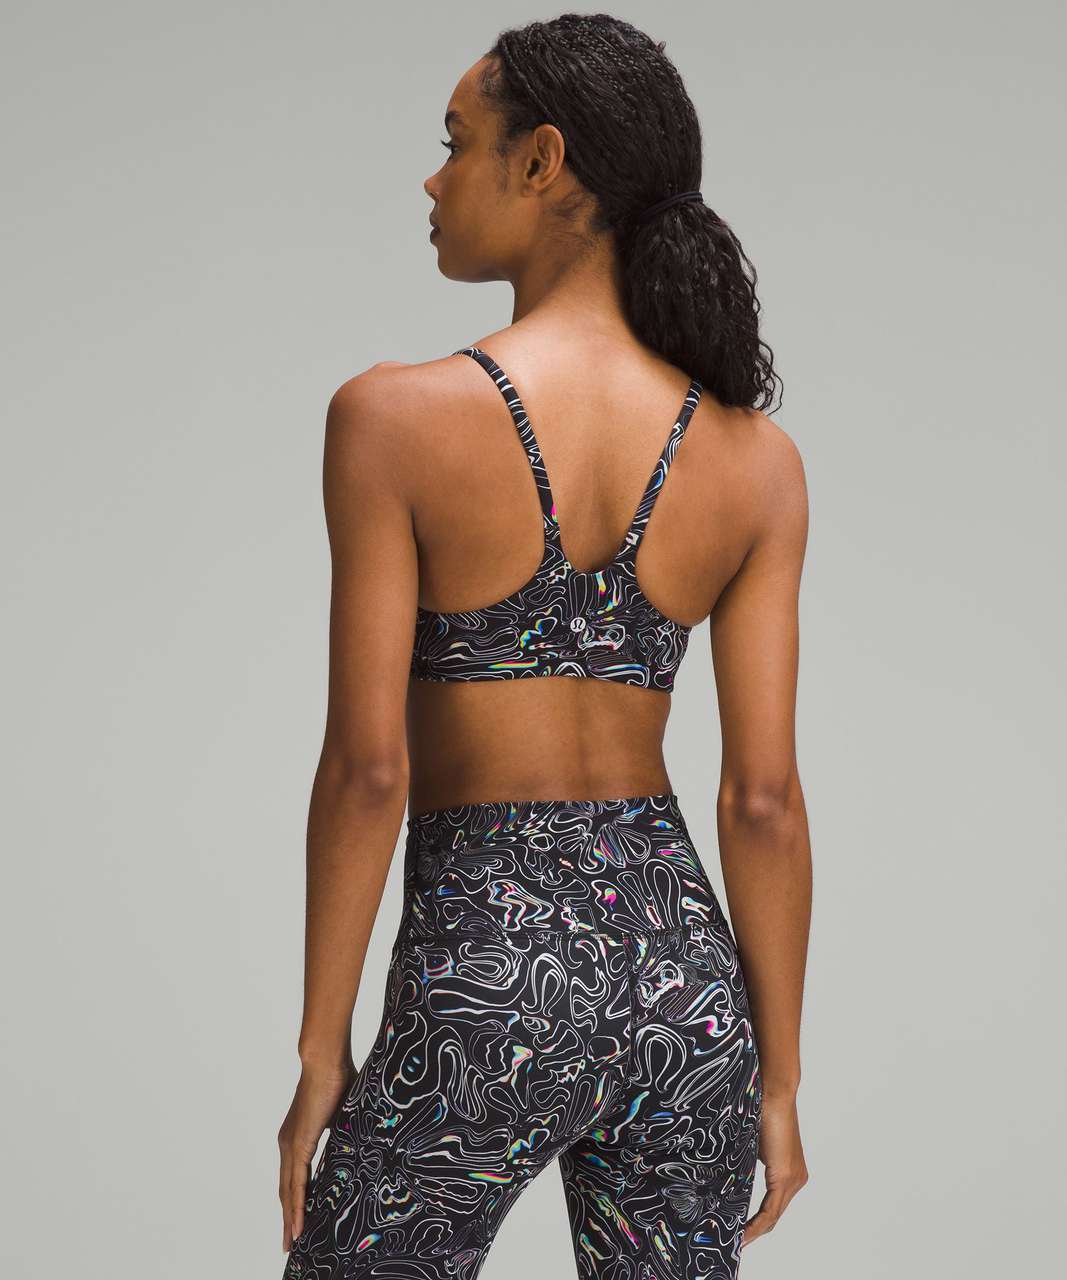 Lululemon Wunder Train Strappy Racer Bra *Light Support, A/B Cup - Daisyfied Yogo Moonbow Black